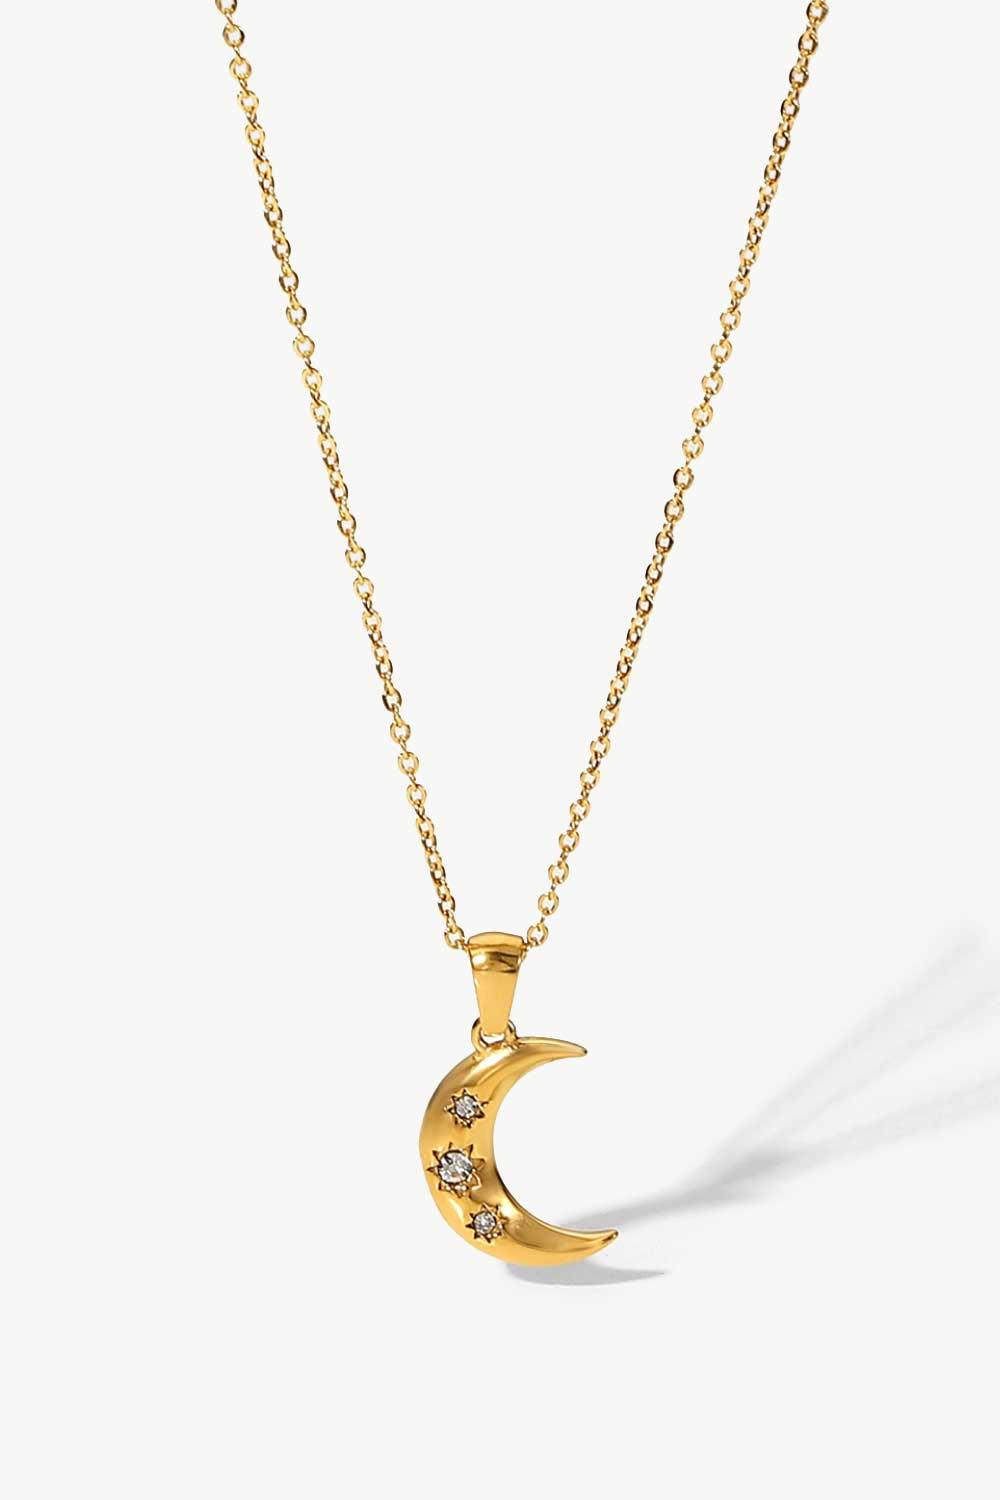 18K Gold Plated Inlaid Zircon Moon Pendant Necklace - Eccentric You